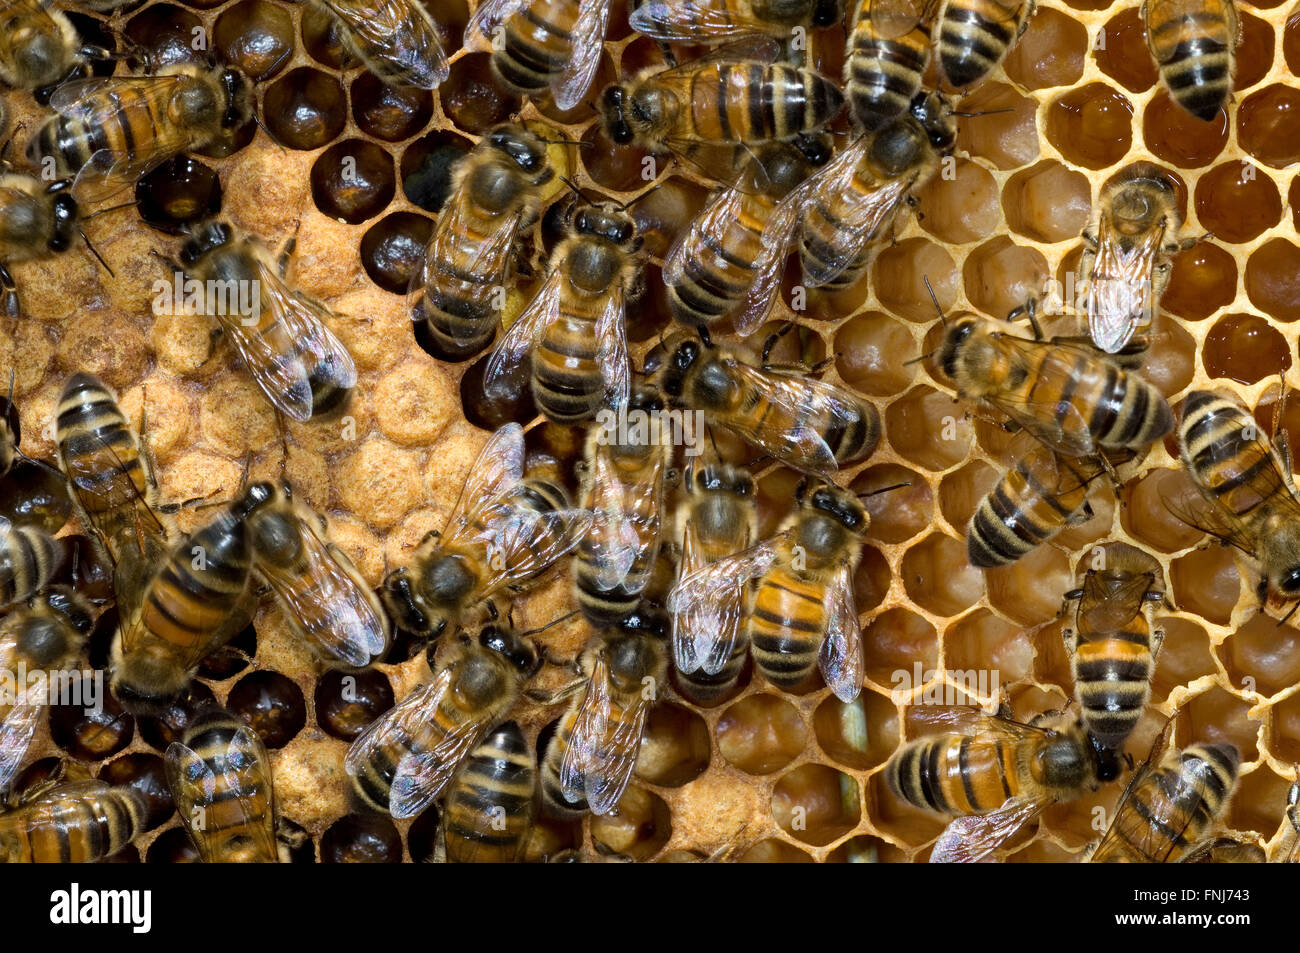 Honey bee workers (Apis mellifera) on comb showing capped and uncapped cells containing honeybee larvae Stock Photo